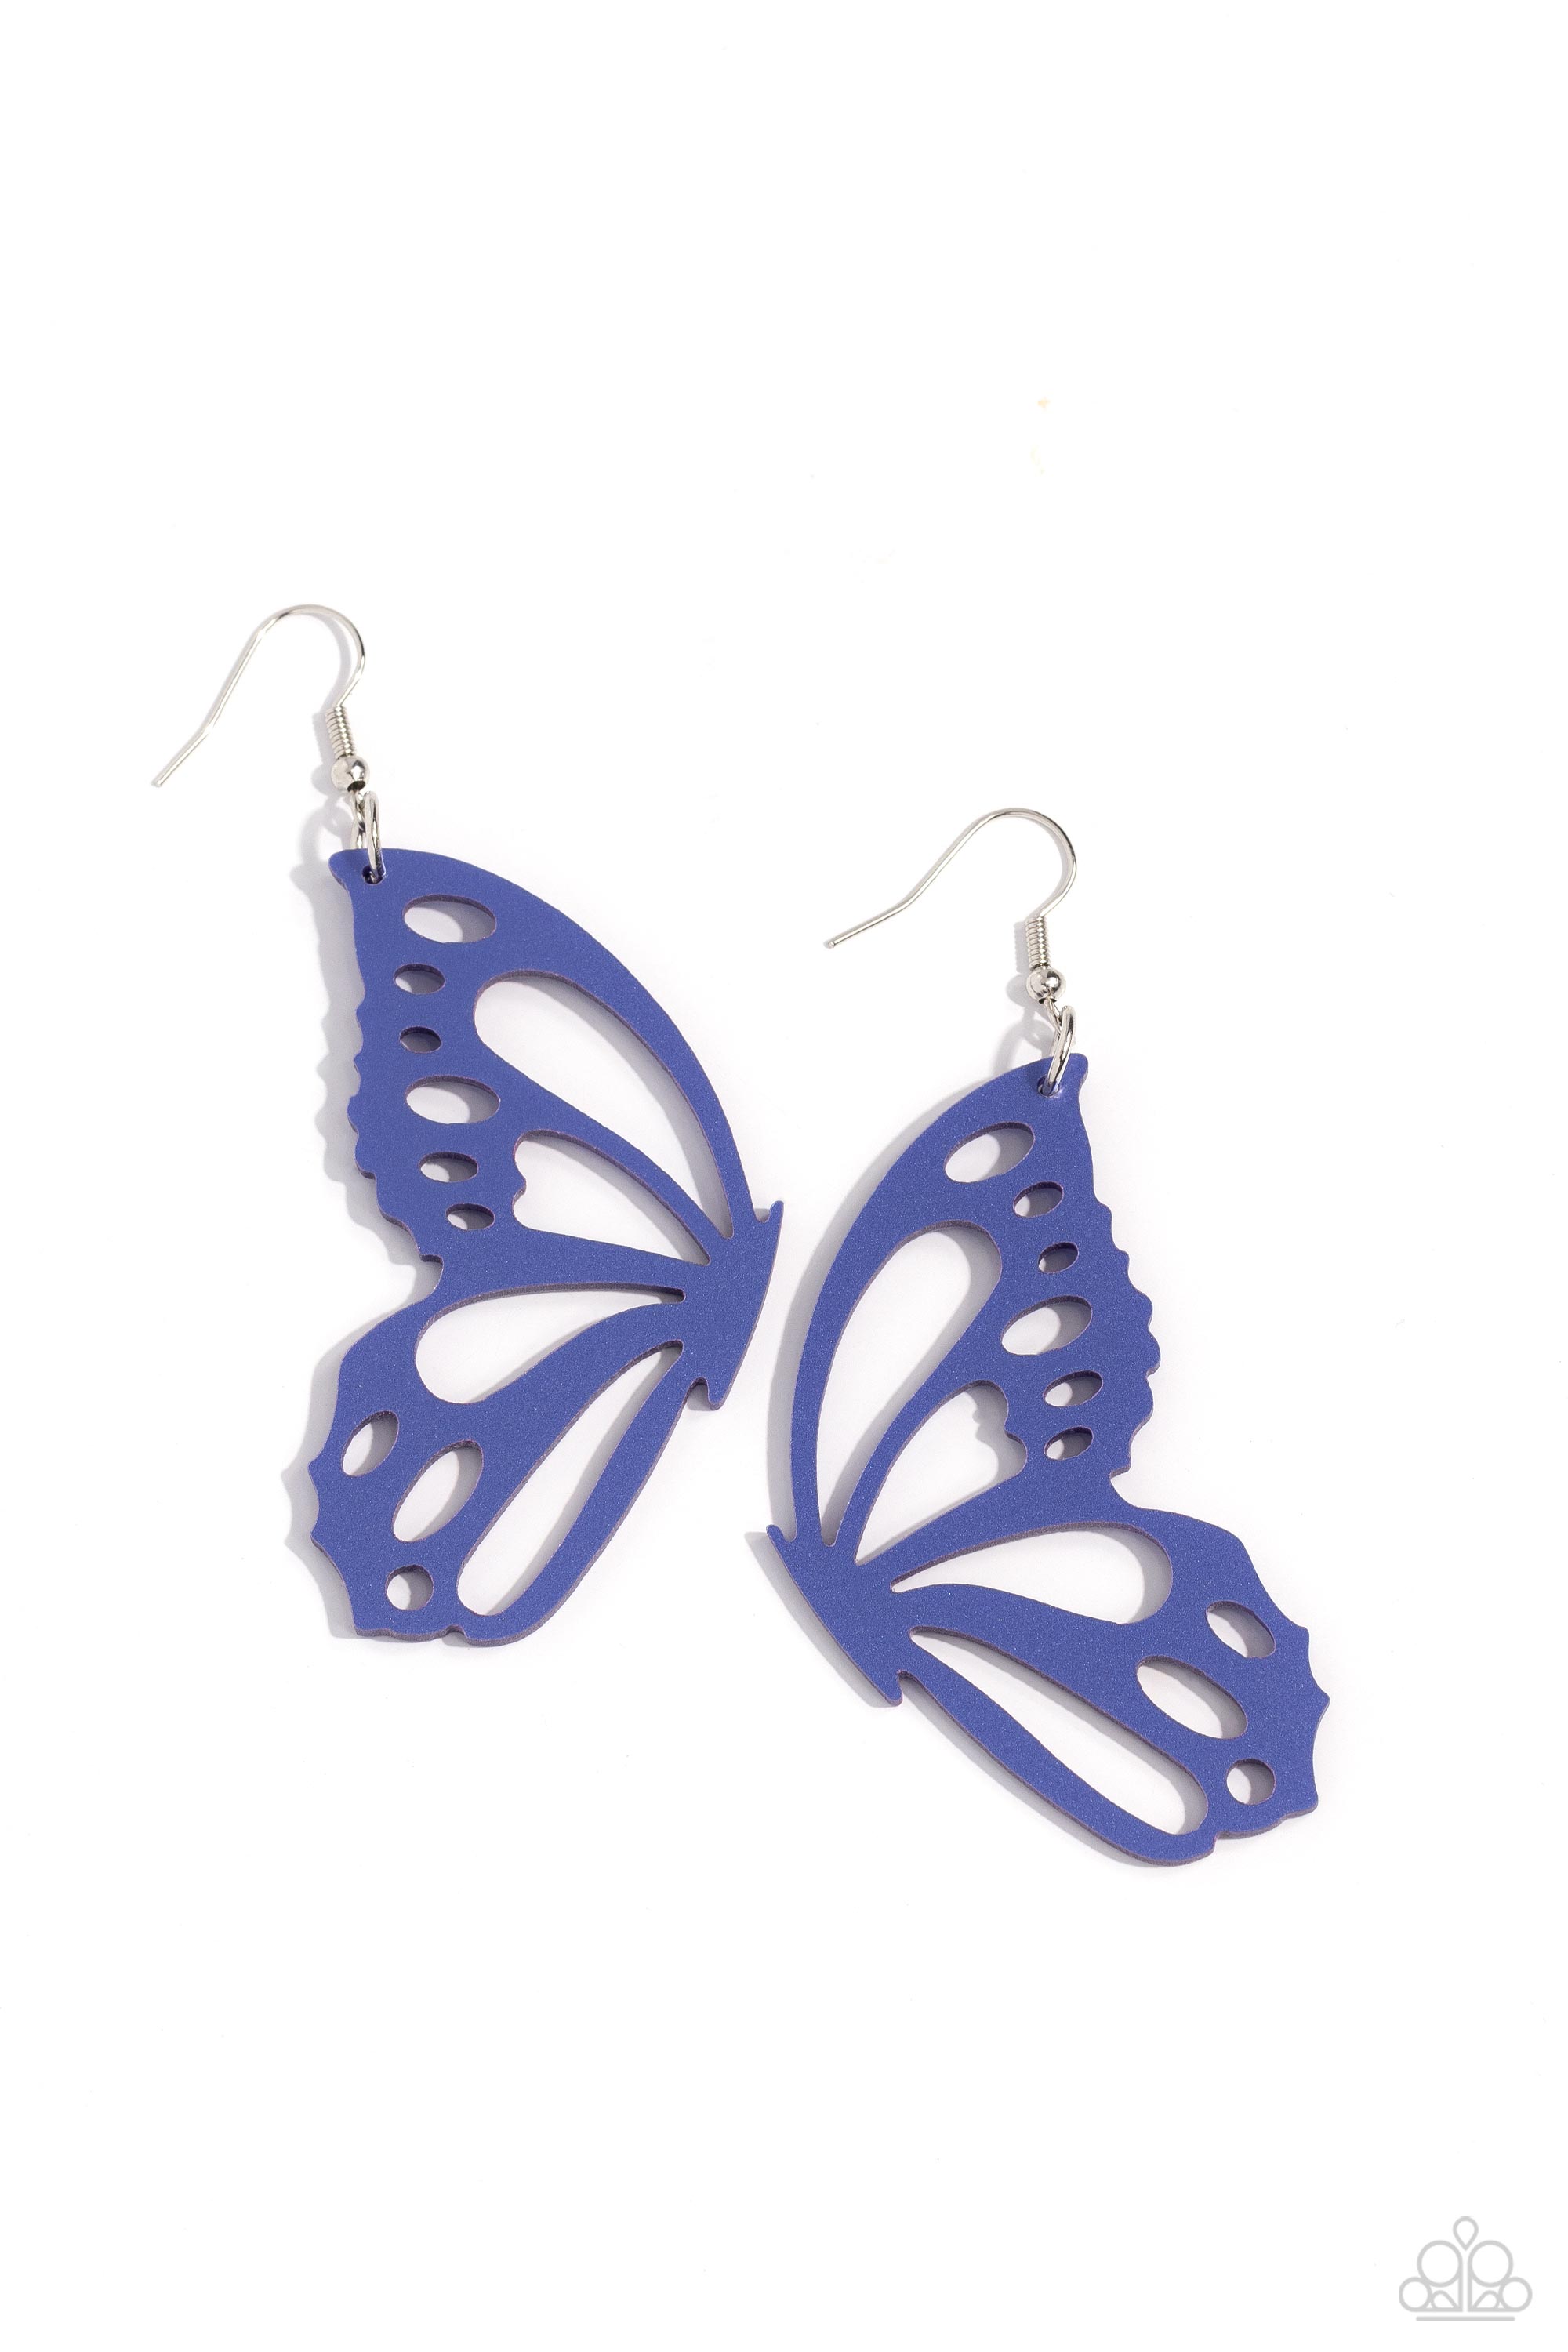 WING of the World Blue Butterfly Earrings - Paparazzi Accessories- lightbox - CarasShop.com - $5 Jewelry by Cara Jewels